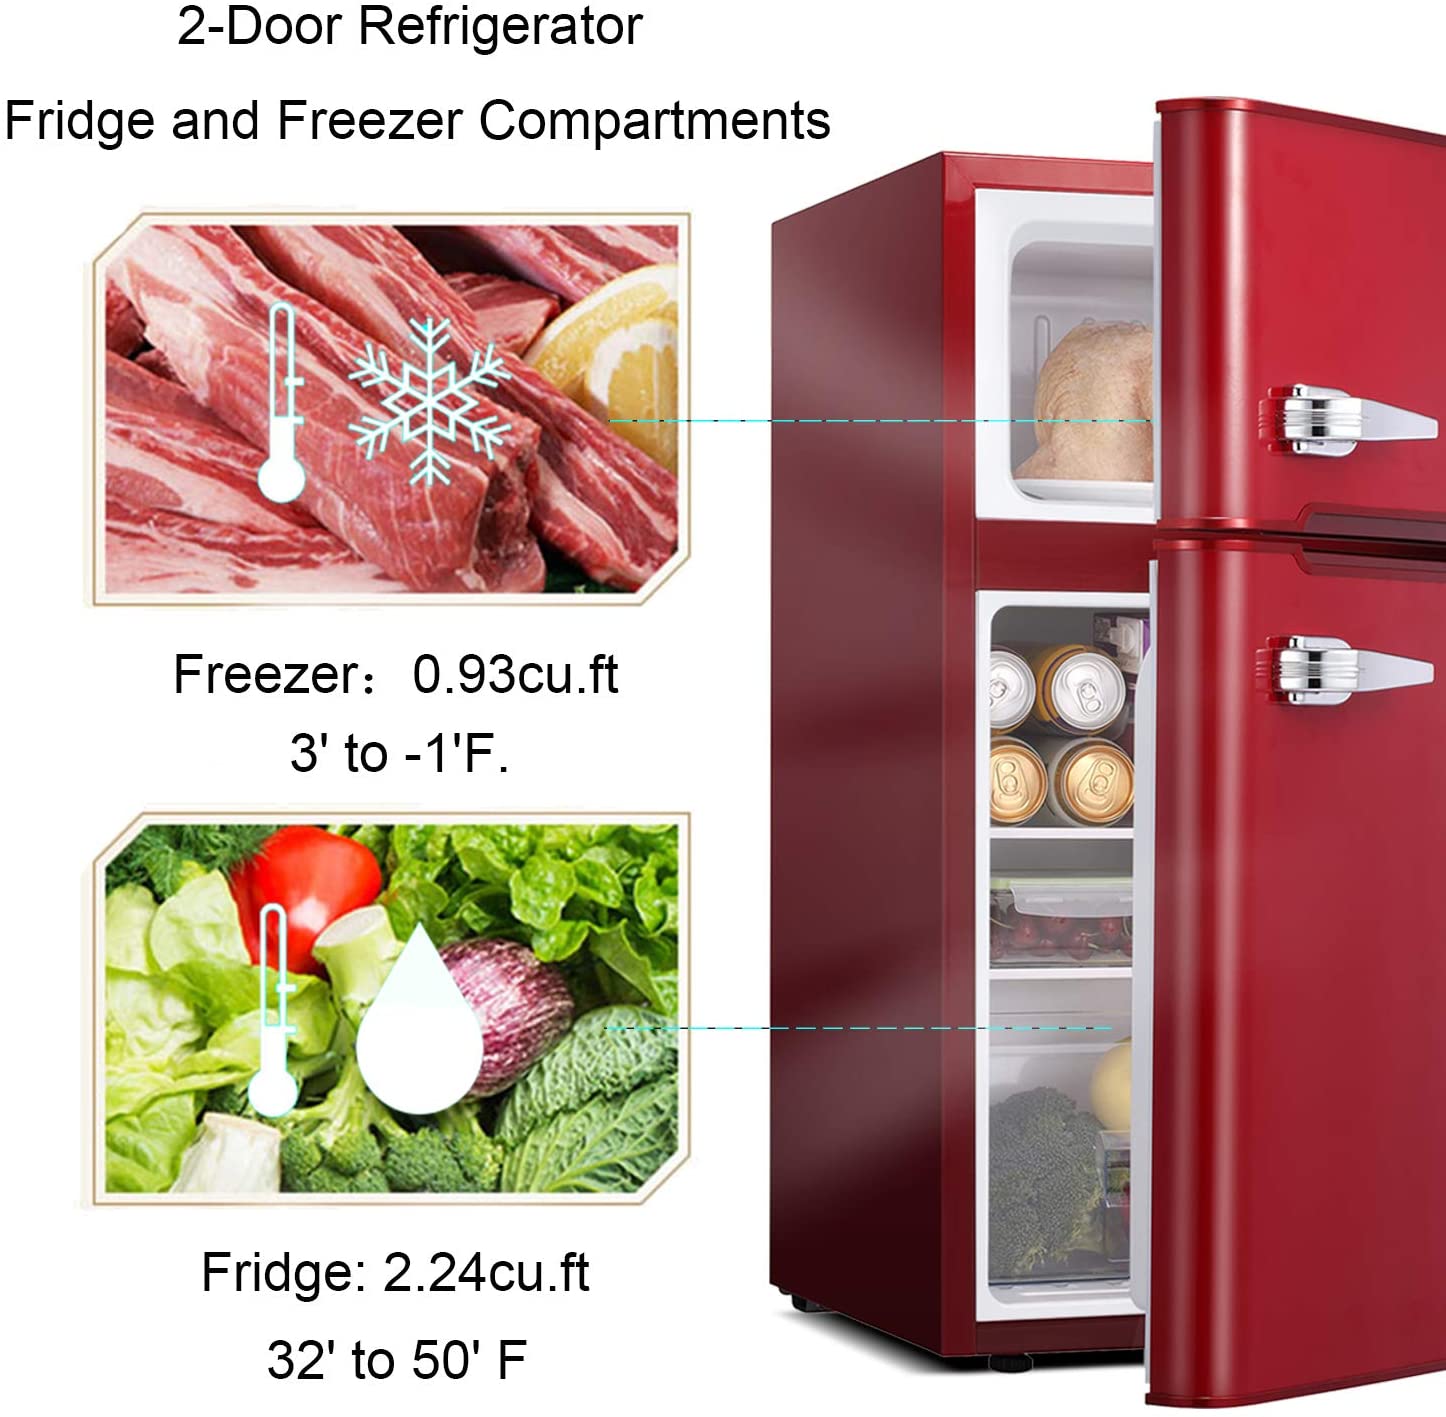 10 BEST RETRO MINI FRIDGE 2022 With Review: Small Retro Style Refrigerator for Bedroom, Apartment, Kitchen All In One Cooling Gear Lab: Any Refrigerators Air Conditioners Freezers Ice Makers Coolers Fans Reviewed And Compared.